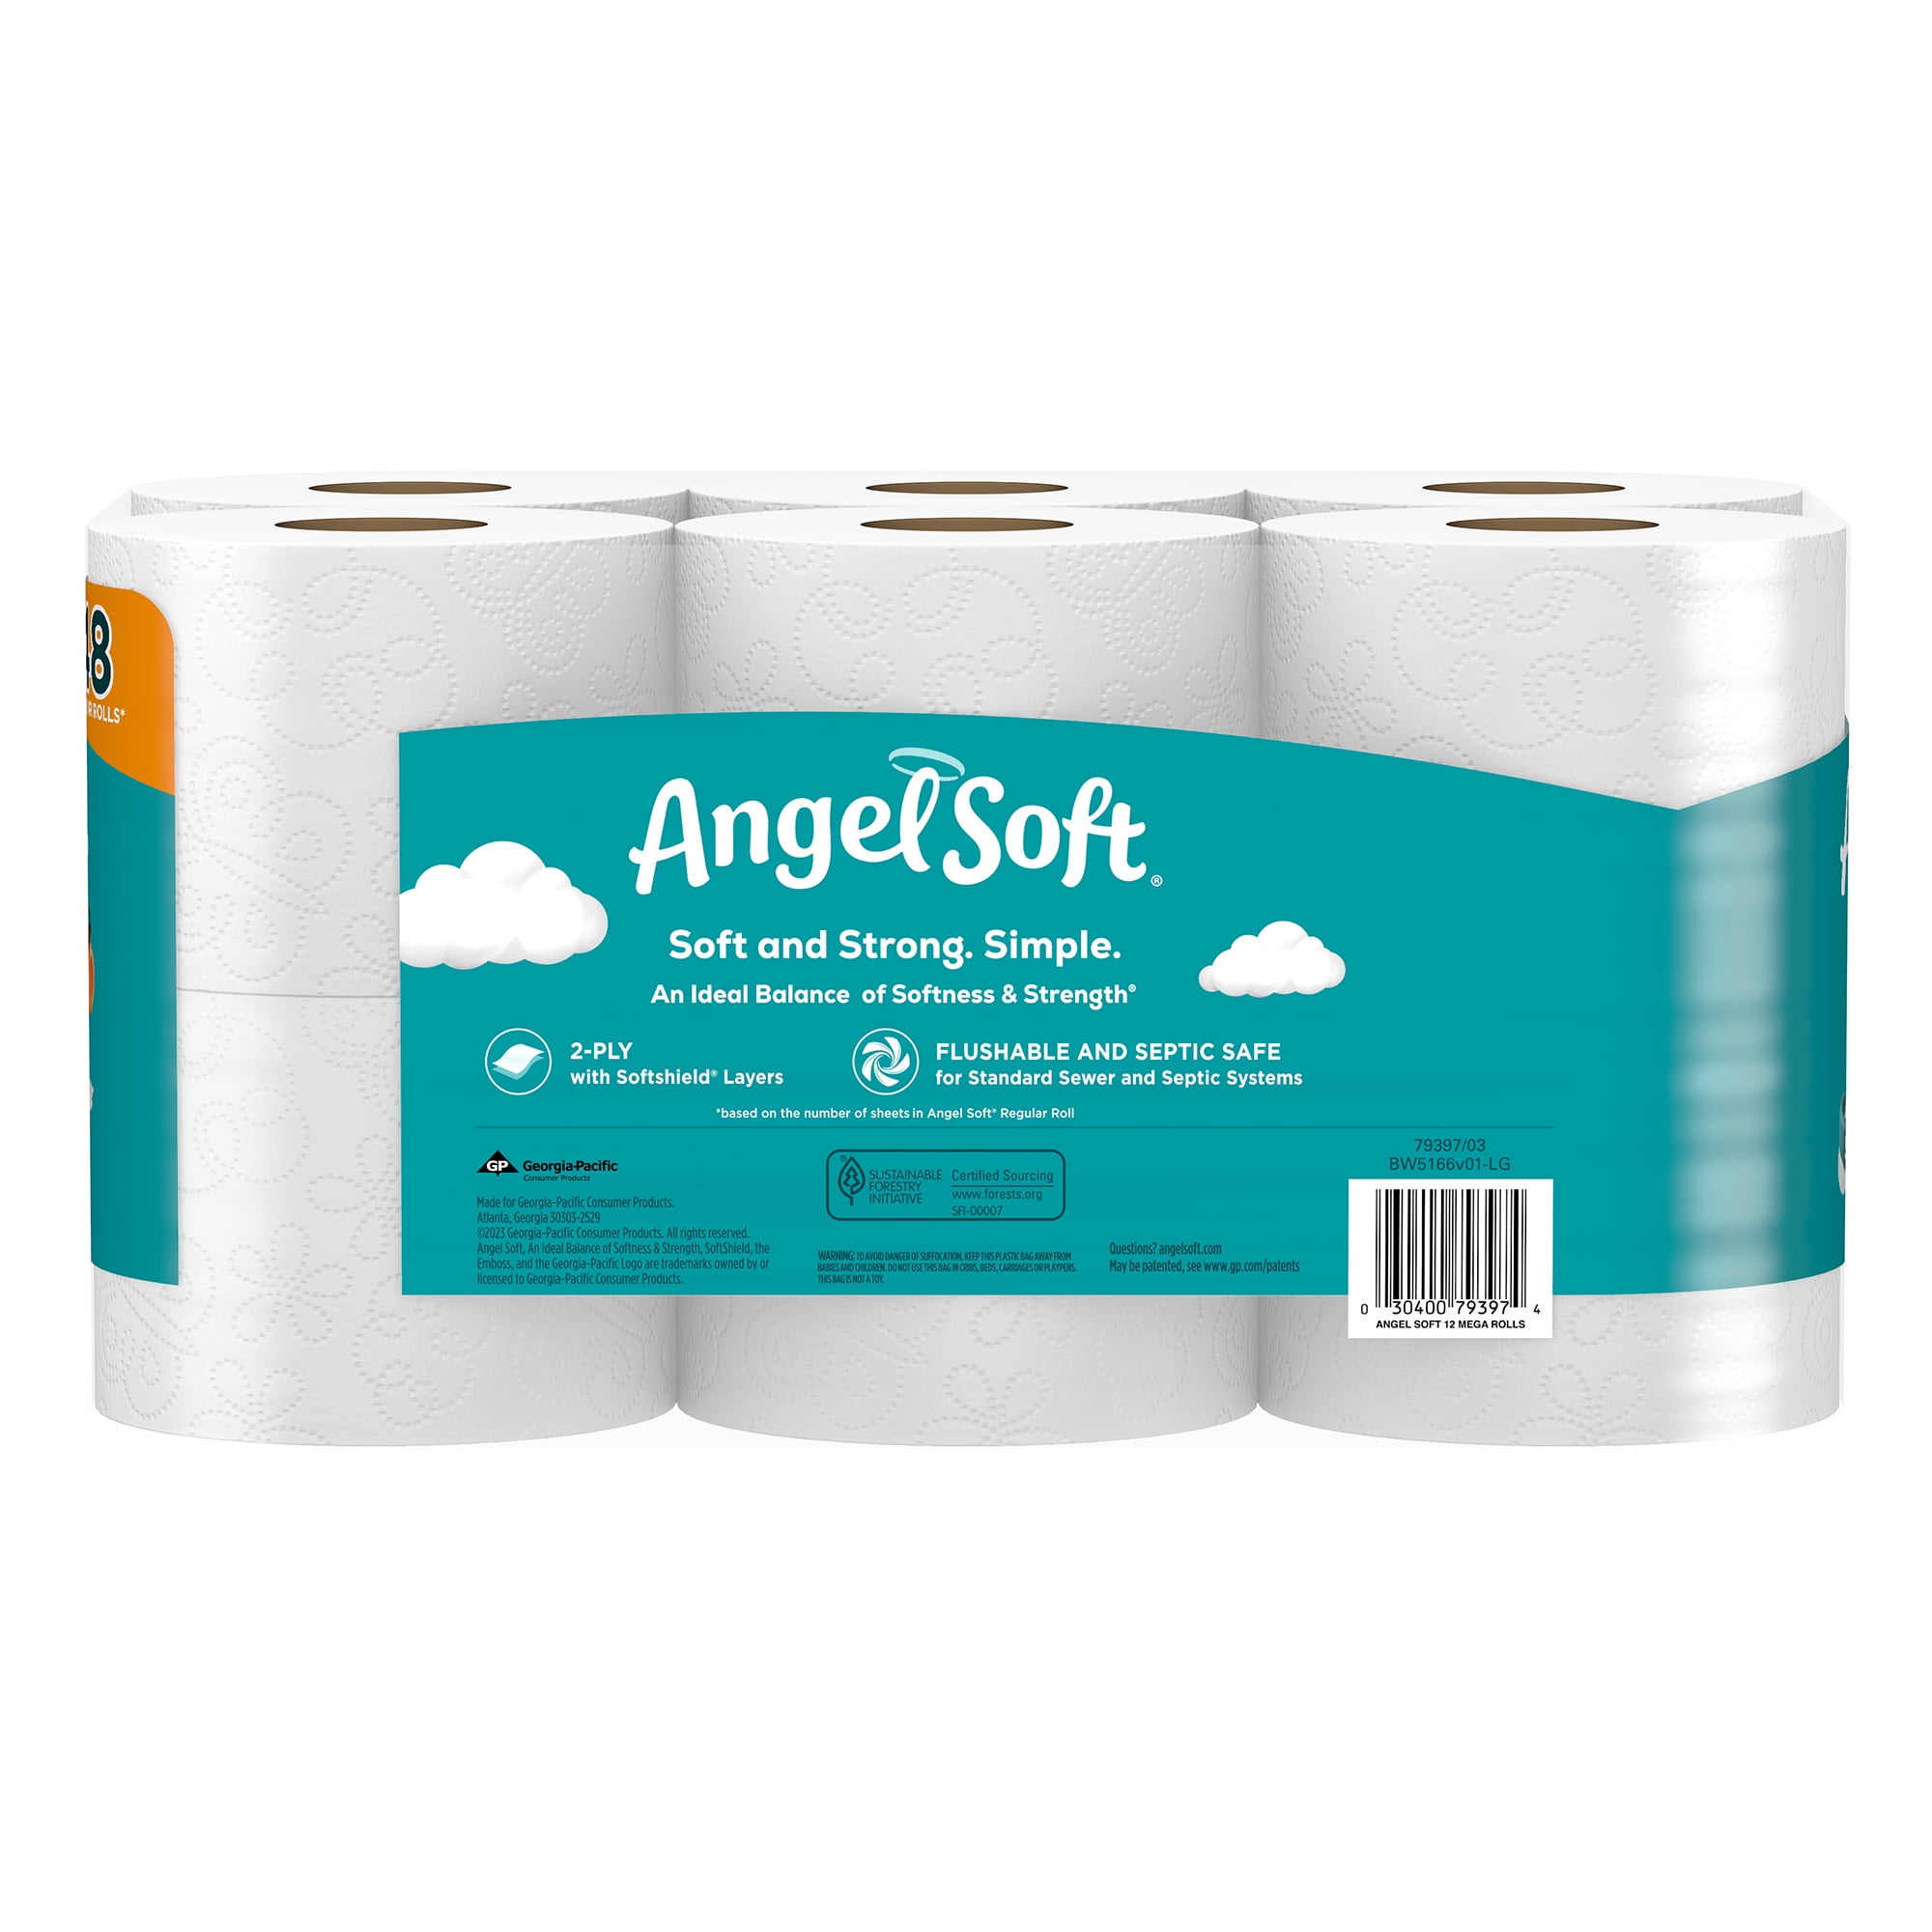 Angel Soft Toilet Paper, 12 Mega Rolls, Soft and Strong Toilet Tissue 